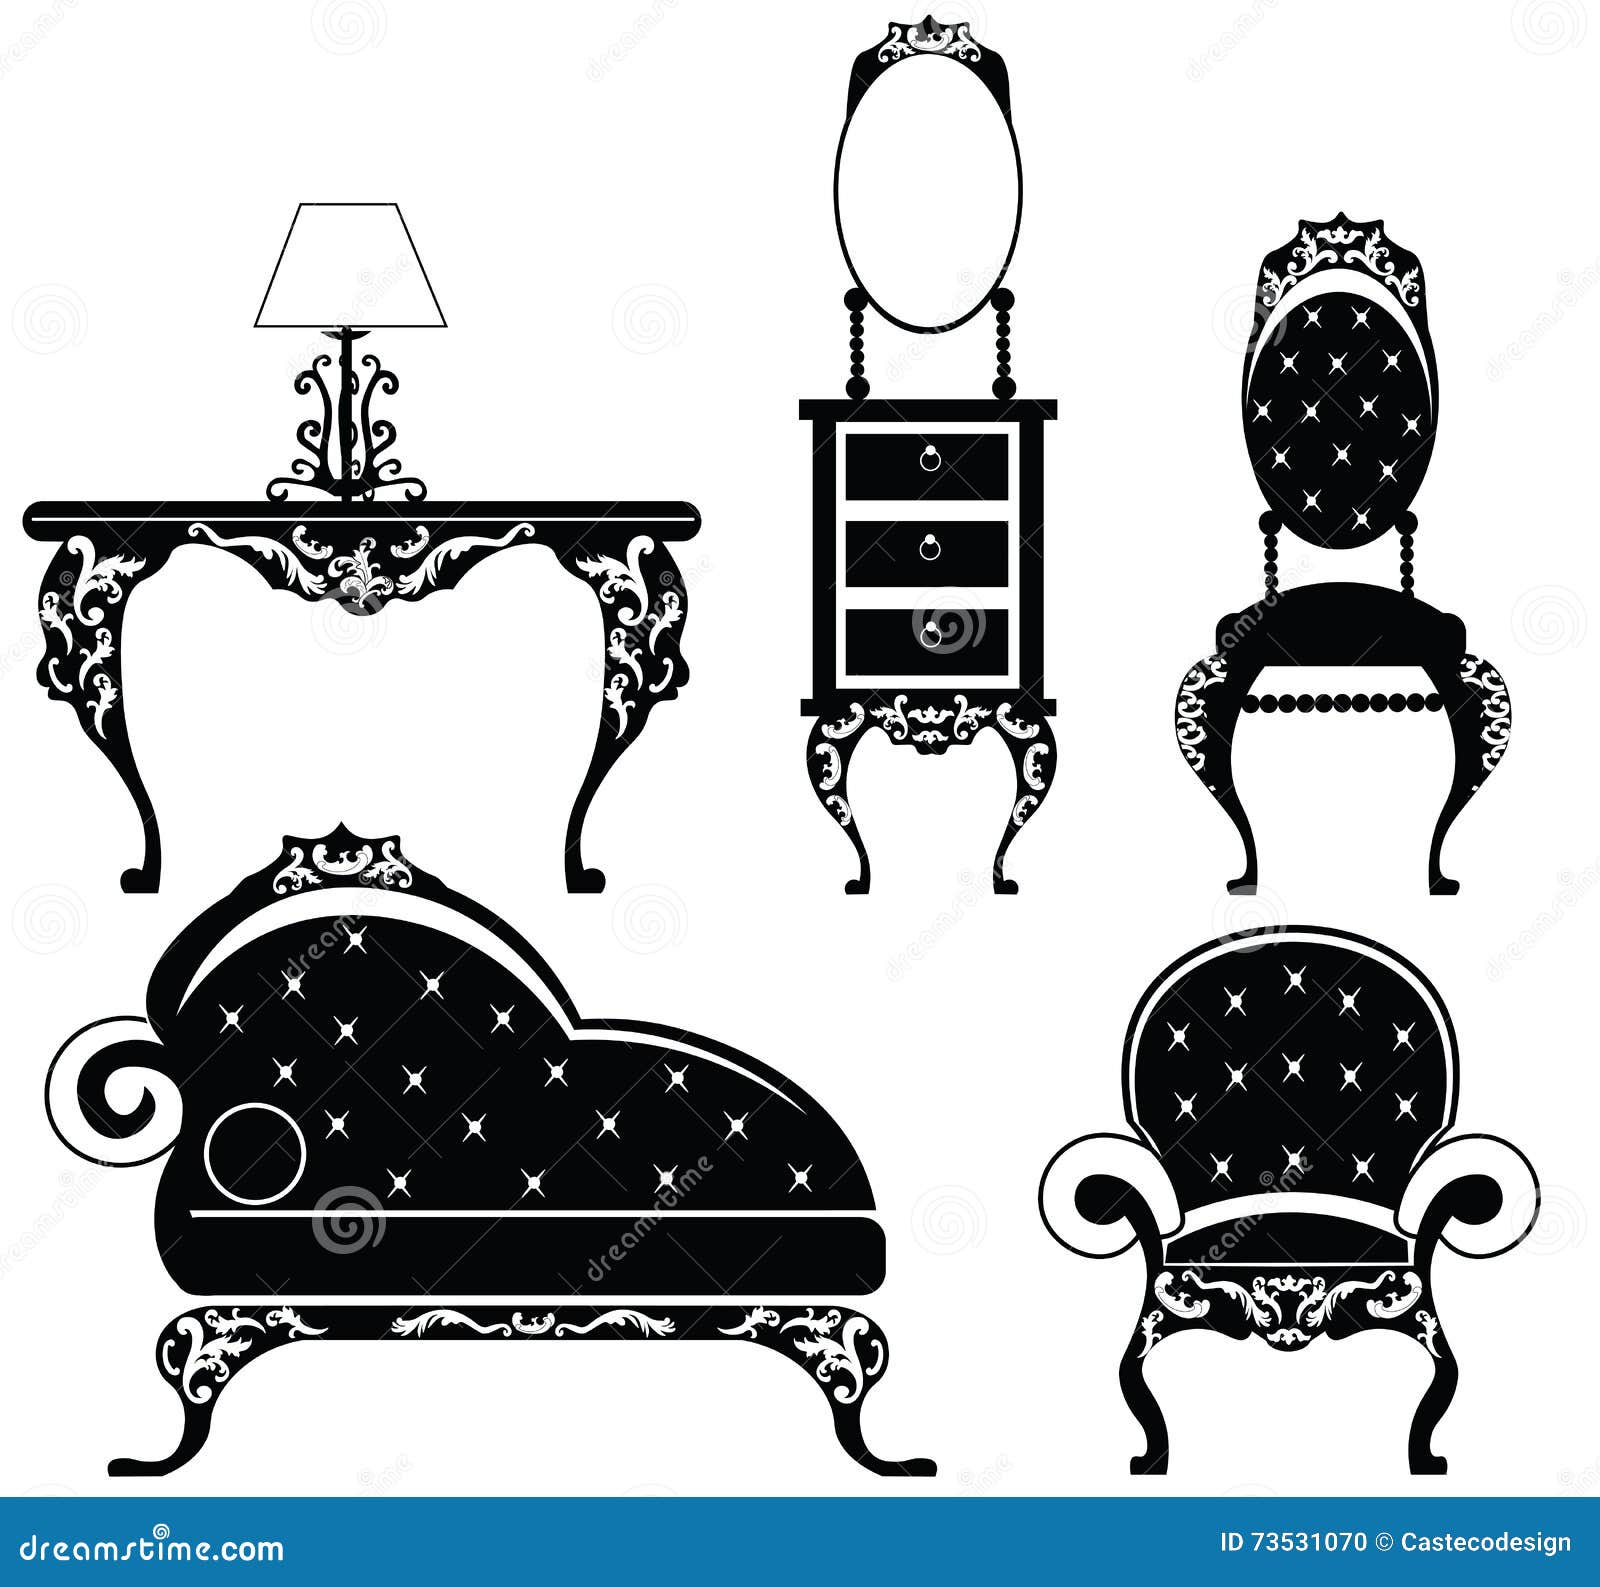 Baroque chair sketch and render | Baroque chair, Furniture sketch,  Comfortable living room chairs